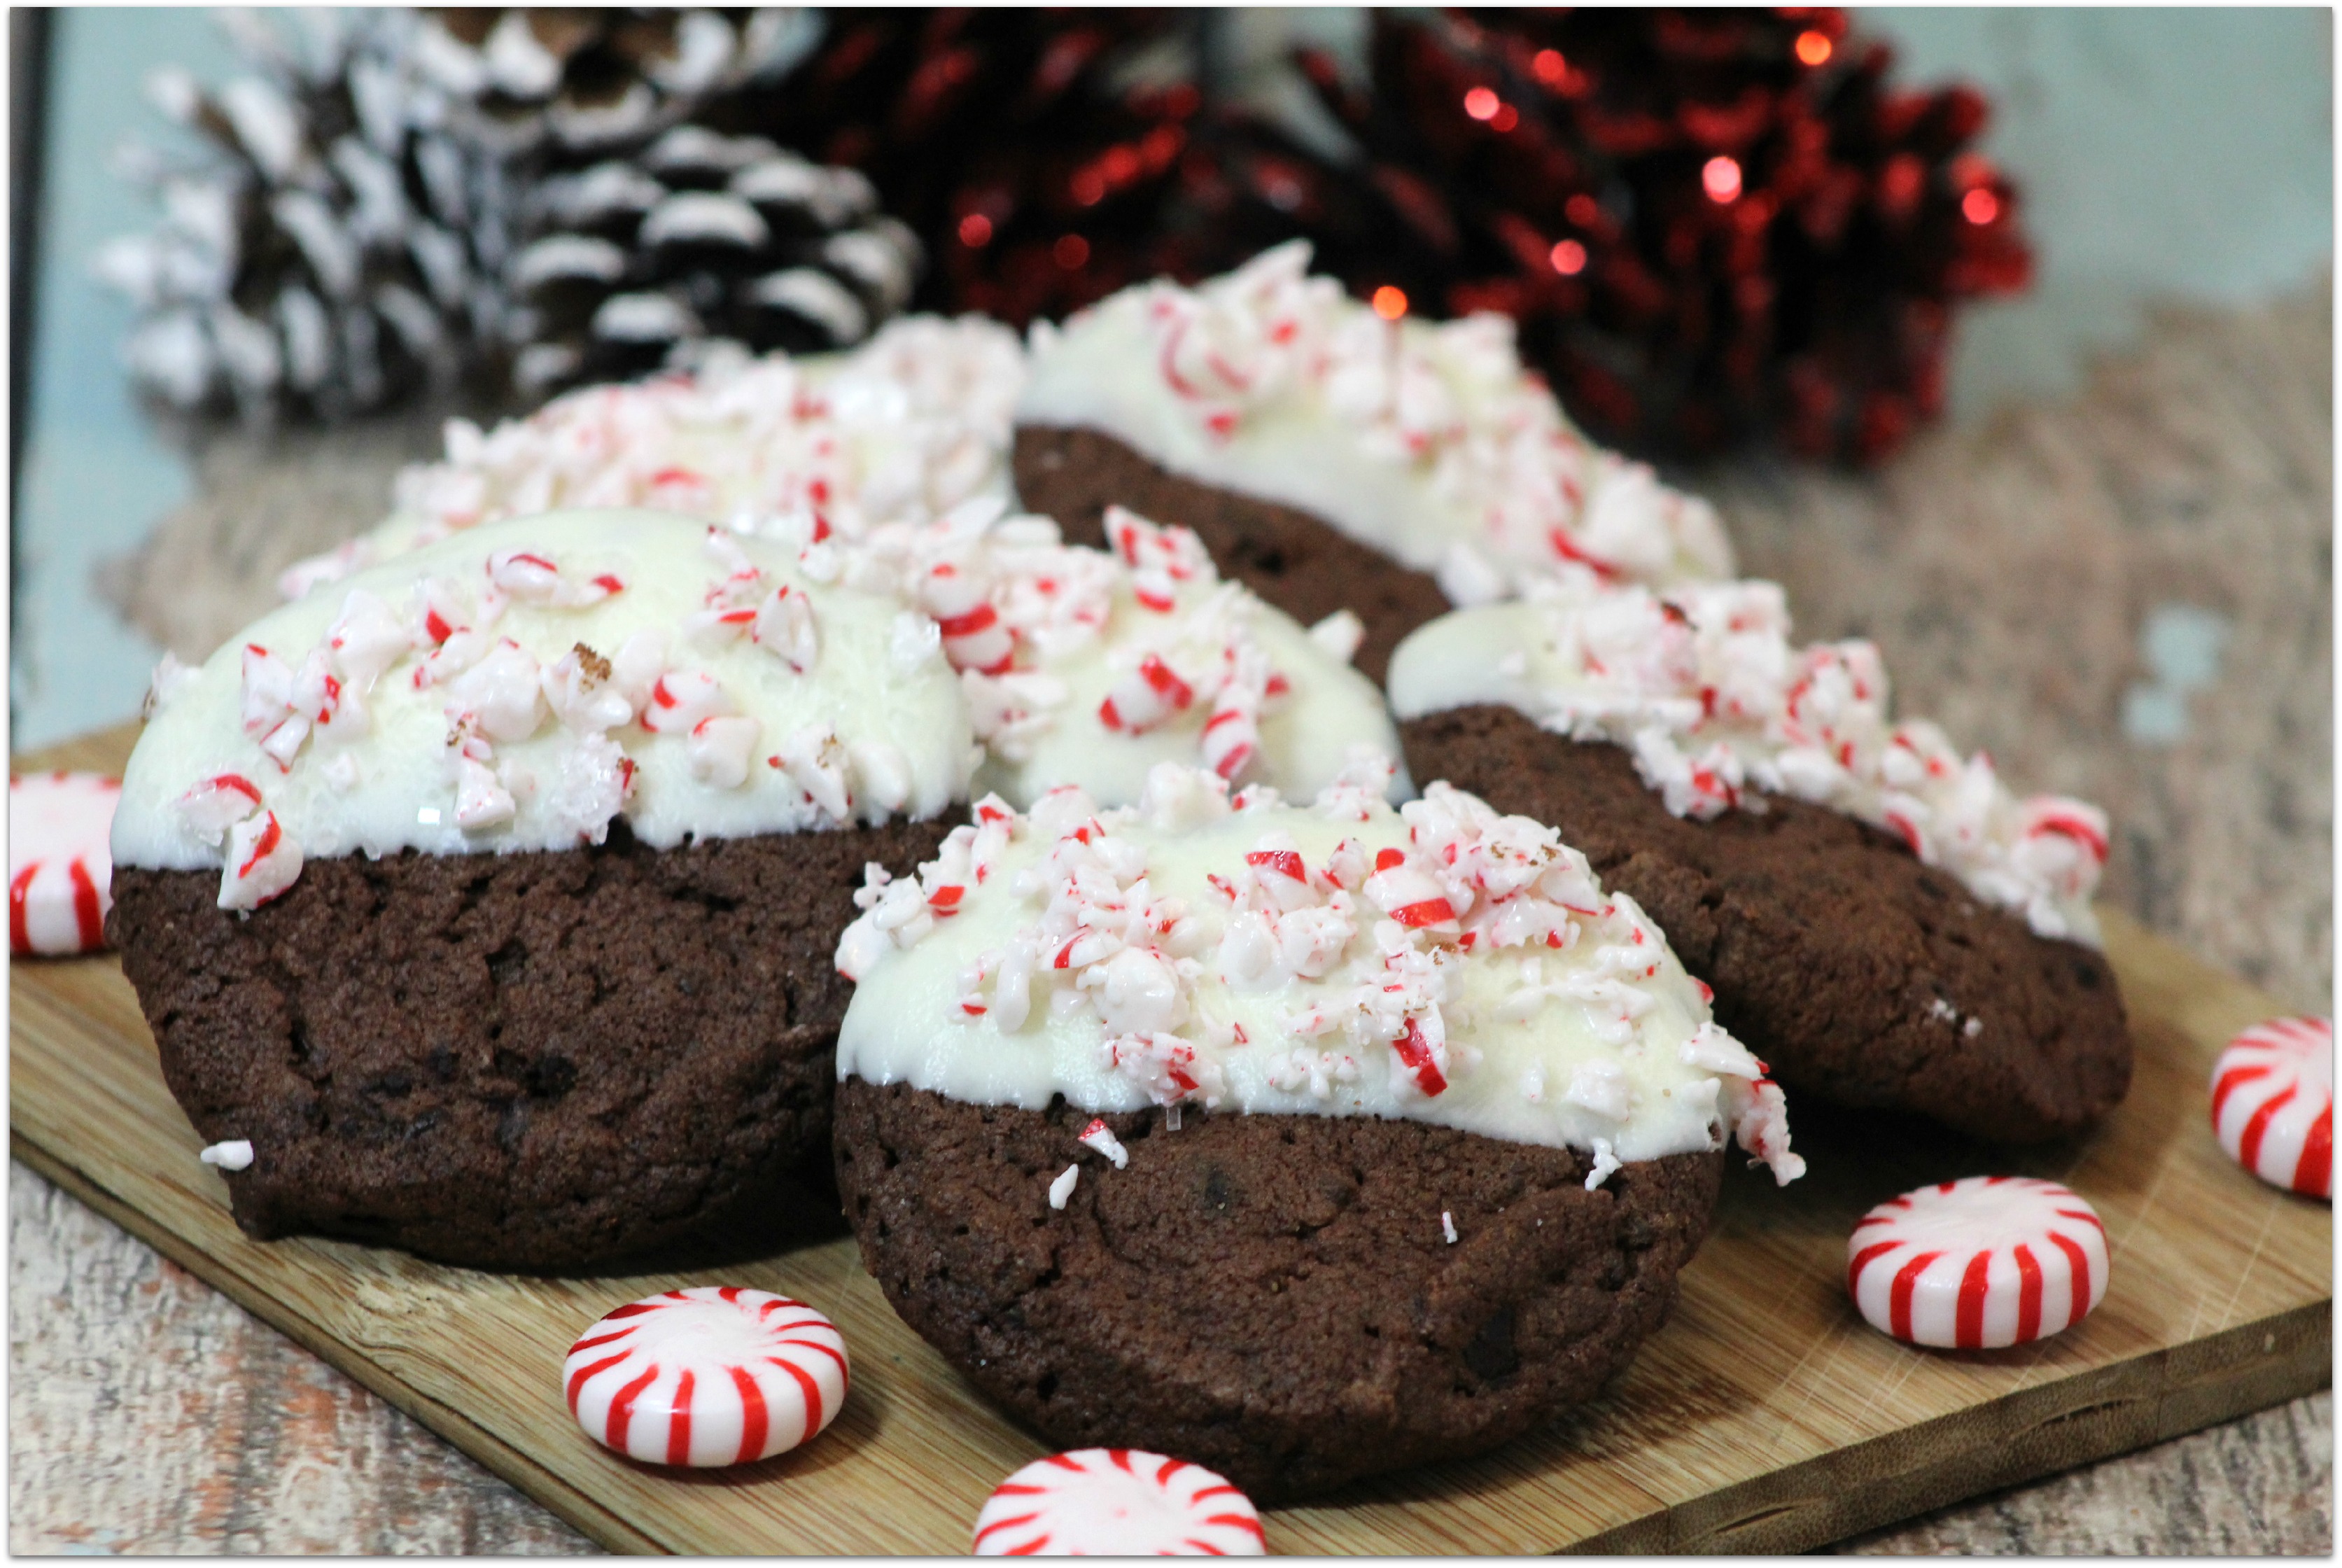 As soon as I get out my Christmas decorations I want to start baking Christmas desserts. Cookies and cupcakes are my favorites, and this recipe for Peppermint Mocha cookies is so easy and so delicious! 